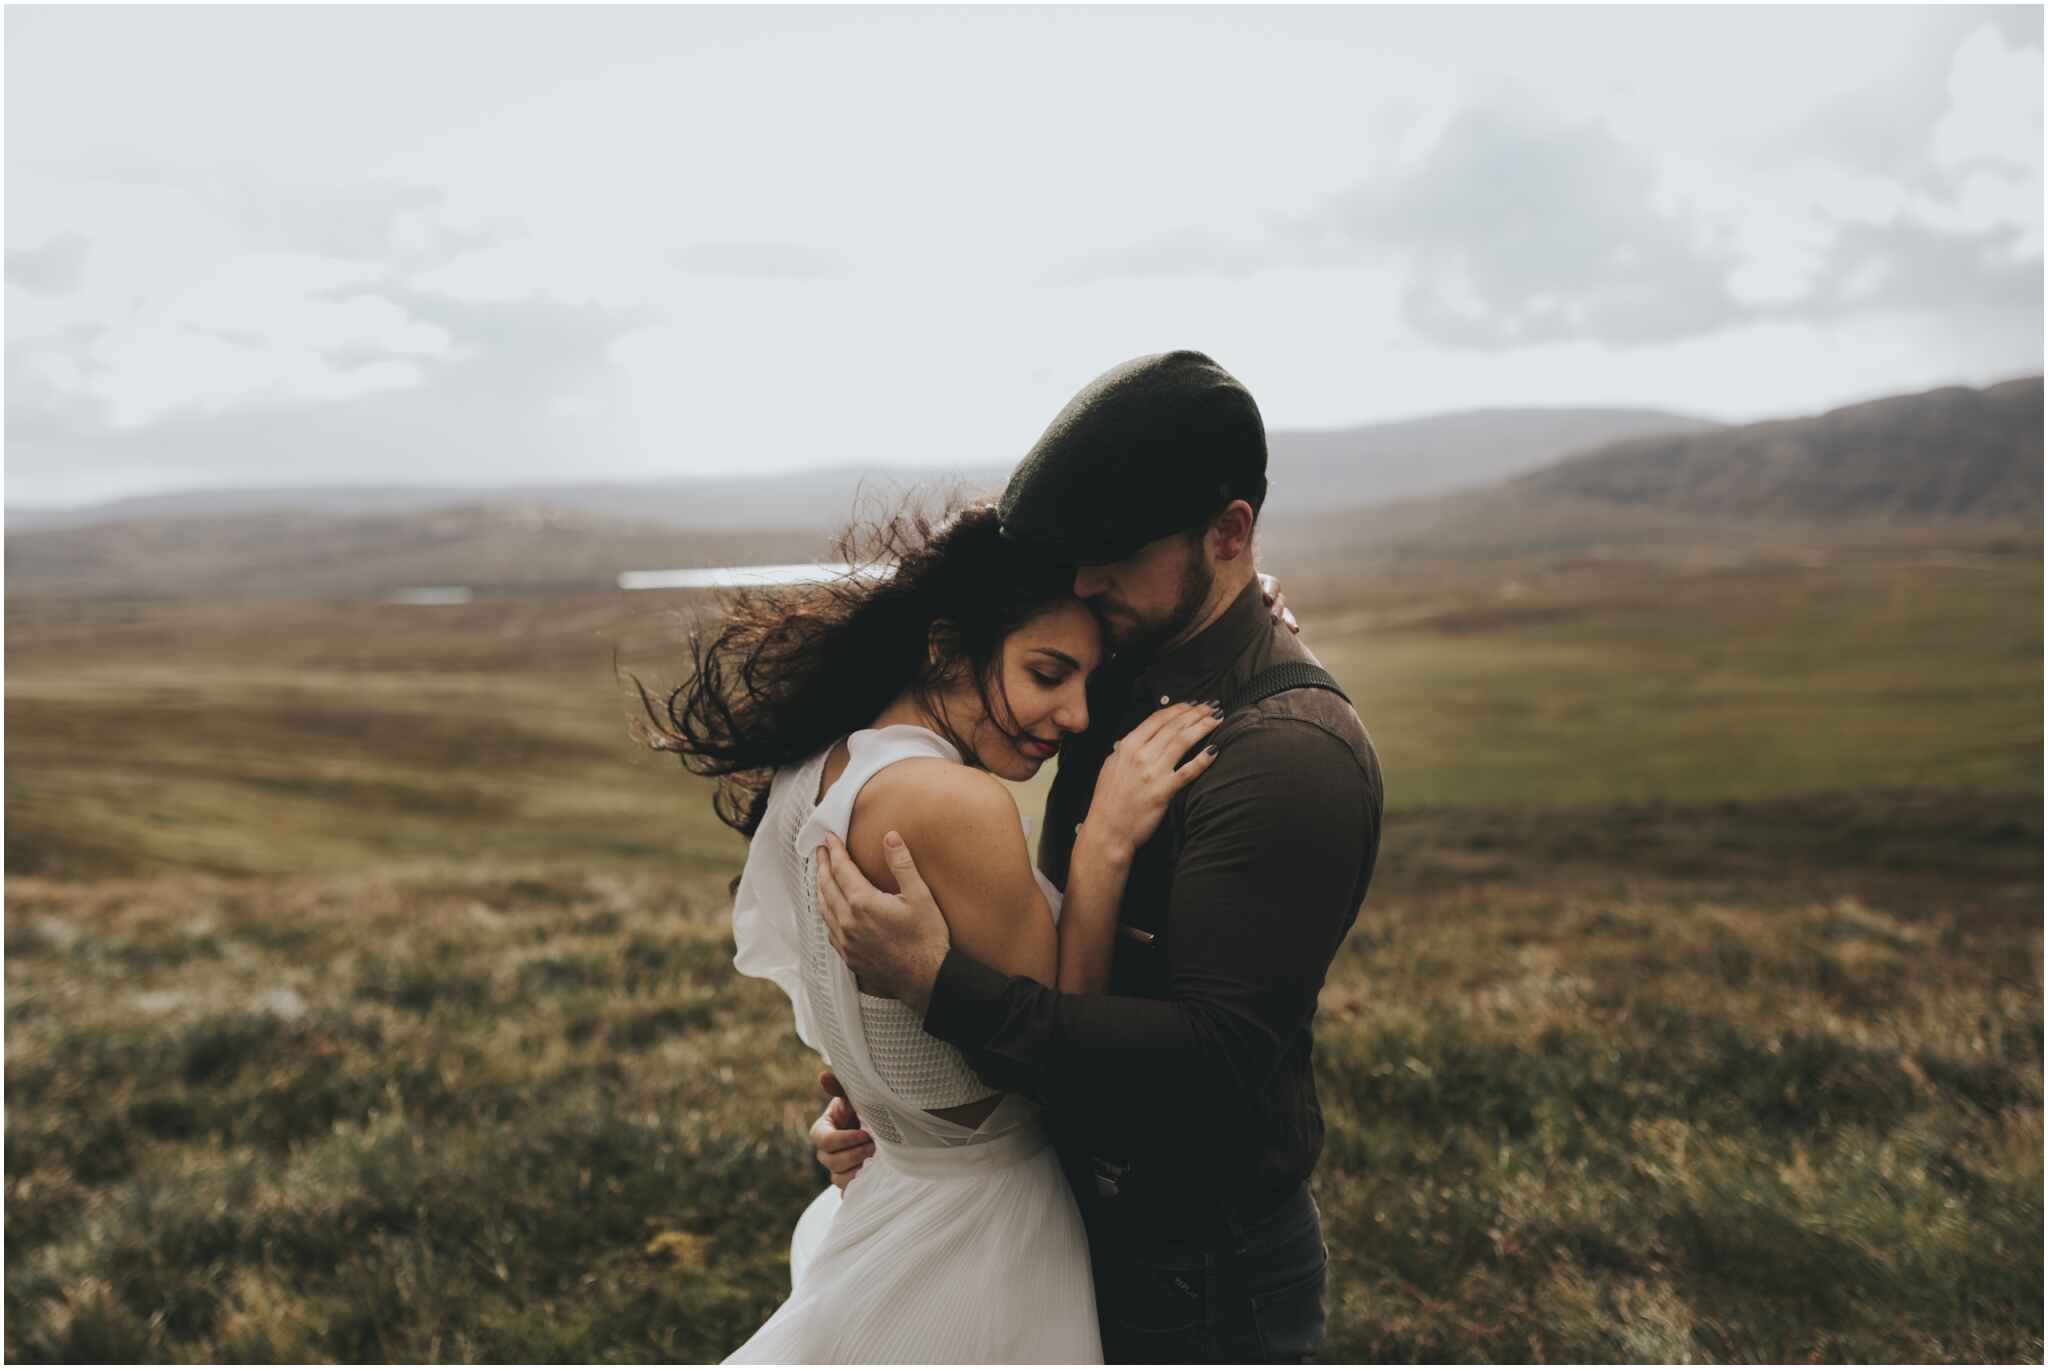 eloping in ireland - Muckish Mountain, Donegal